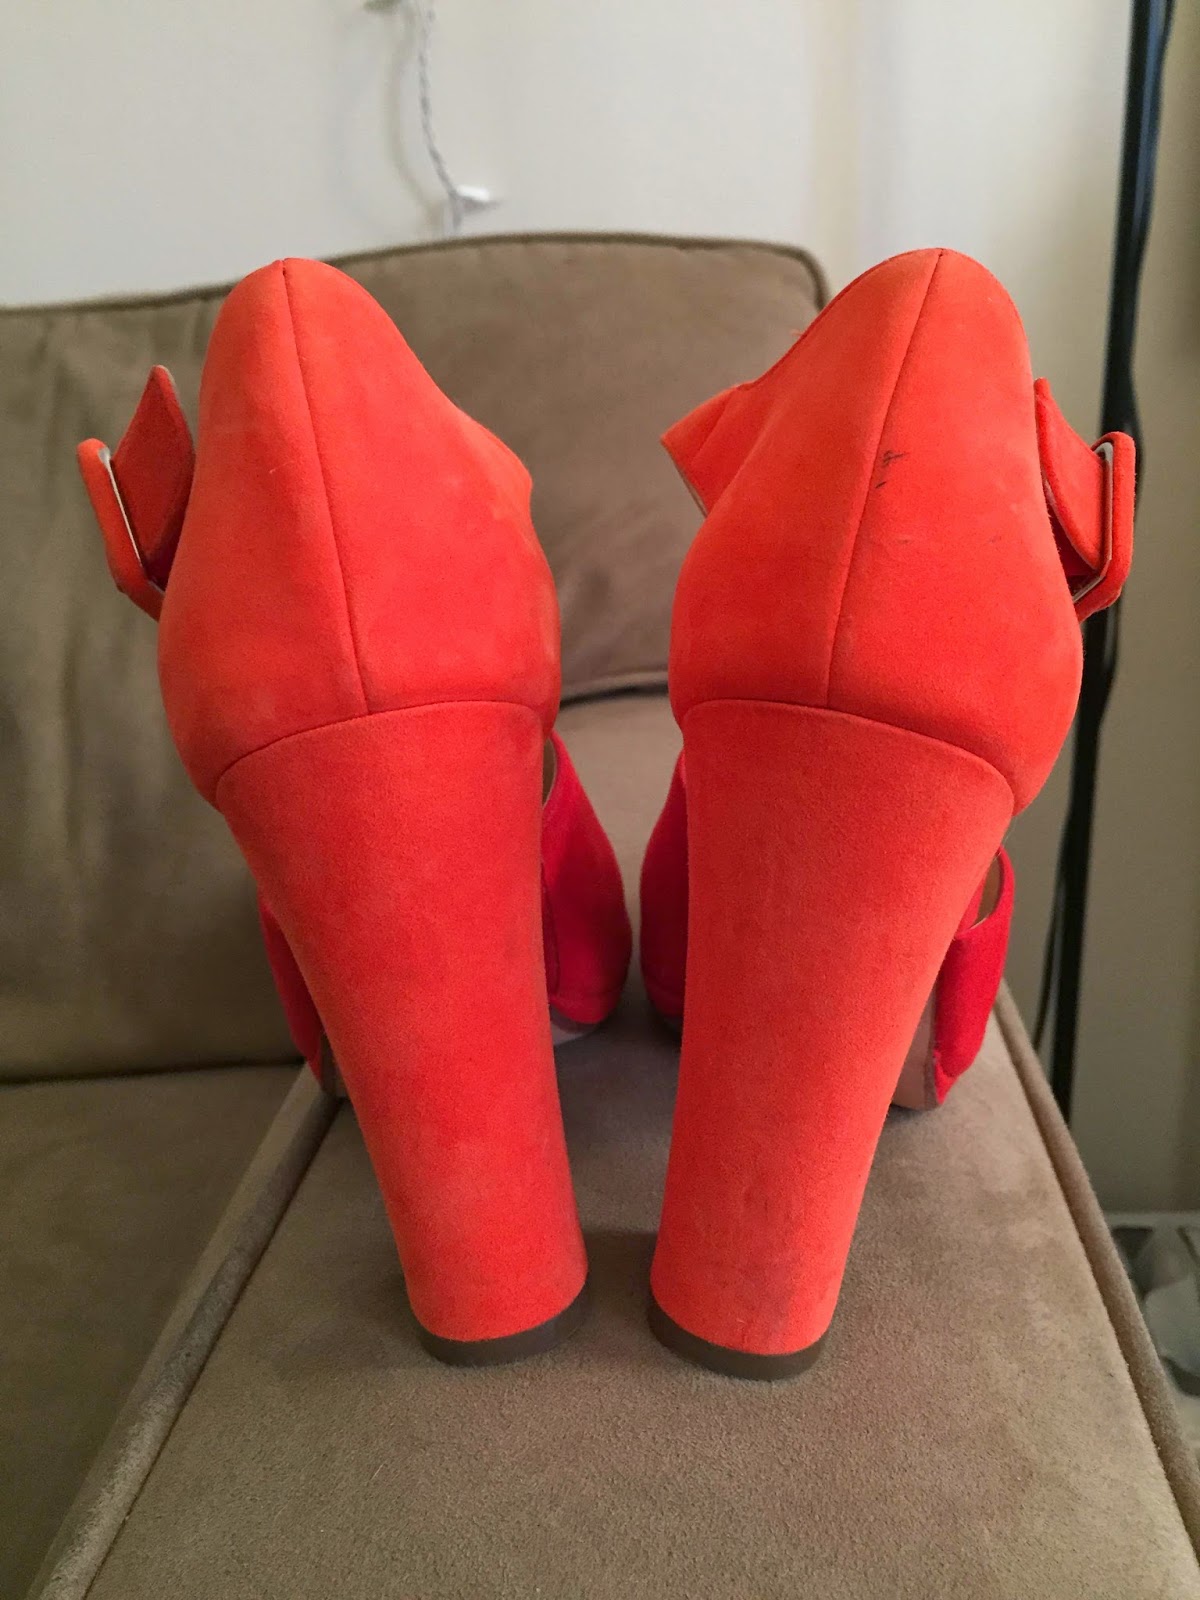 laws of general economy: Cole Haan red suede platform sandals size 8